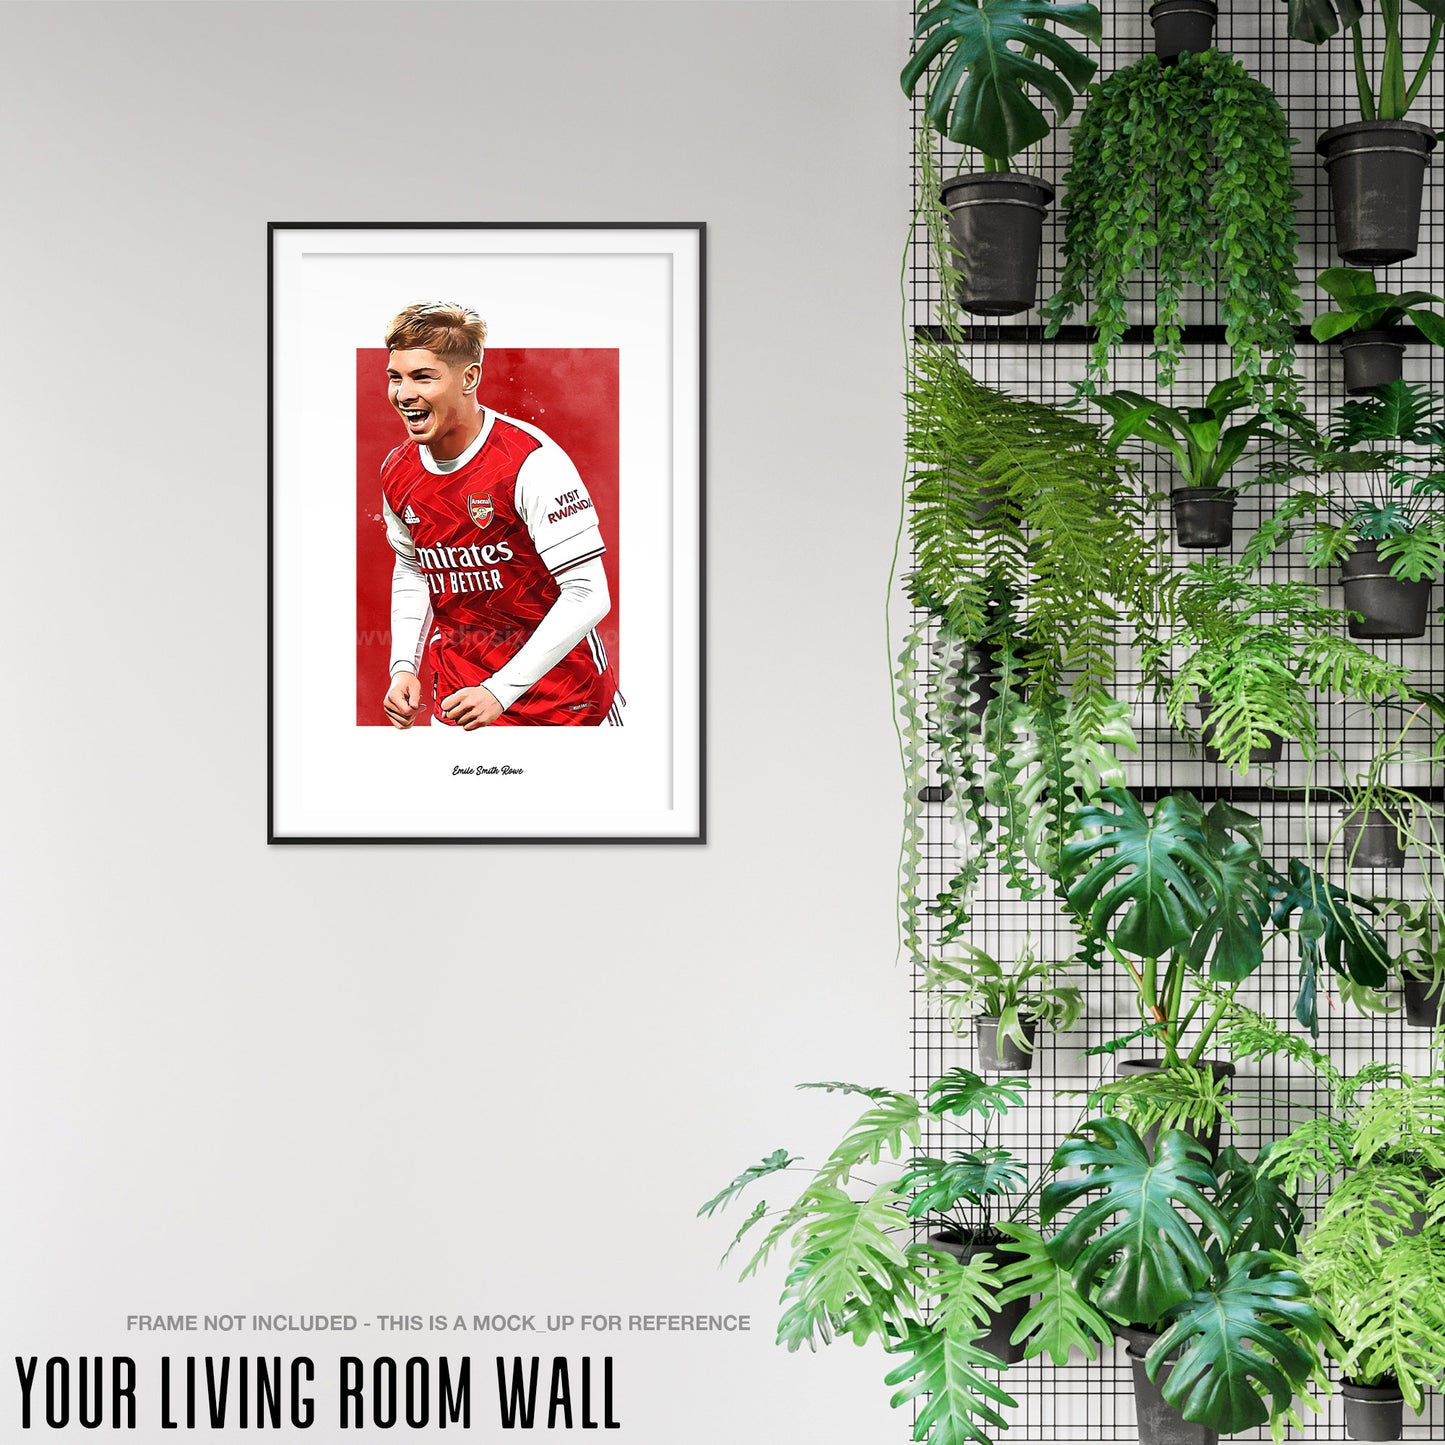 Emile Smith Rowe Poster, Soccer Fan Art Print, Man Cave Gift